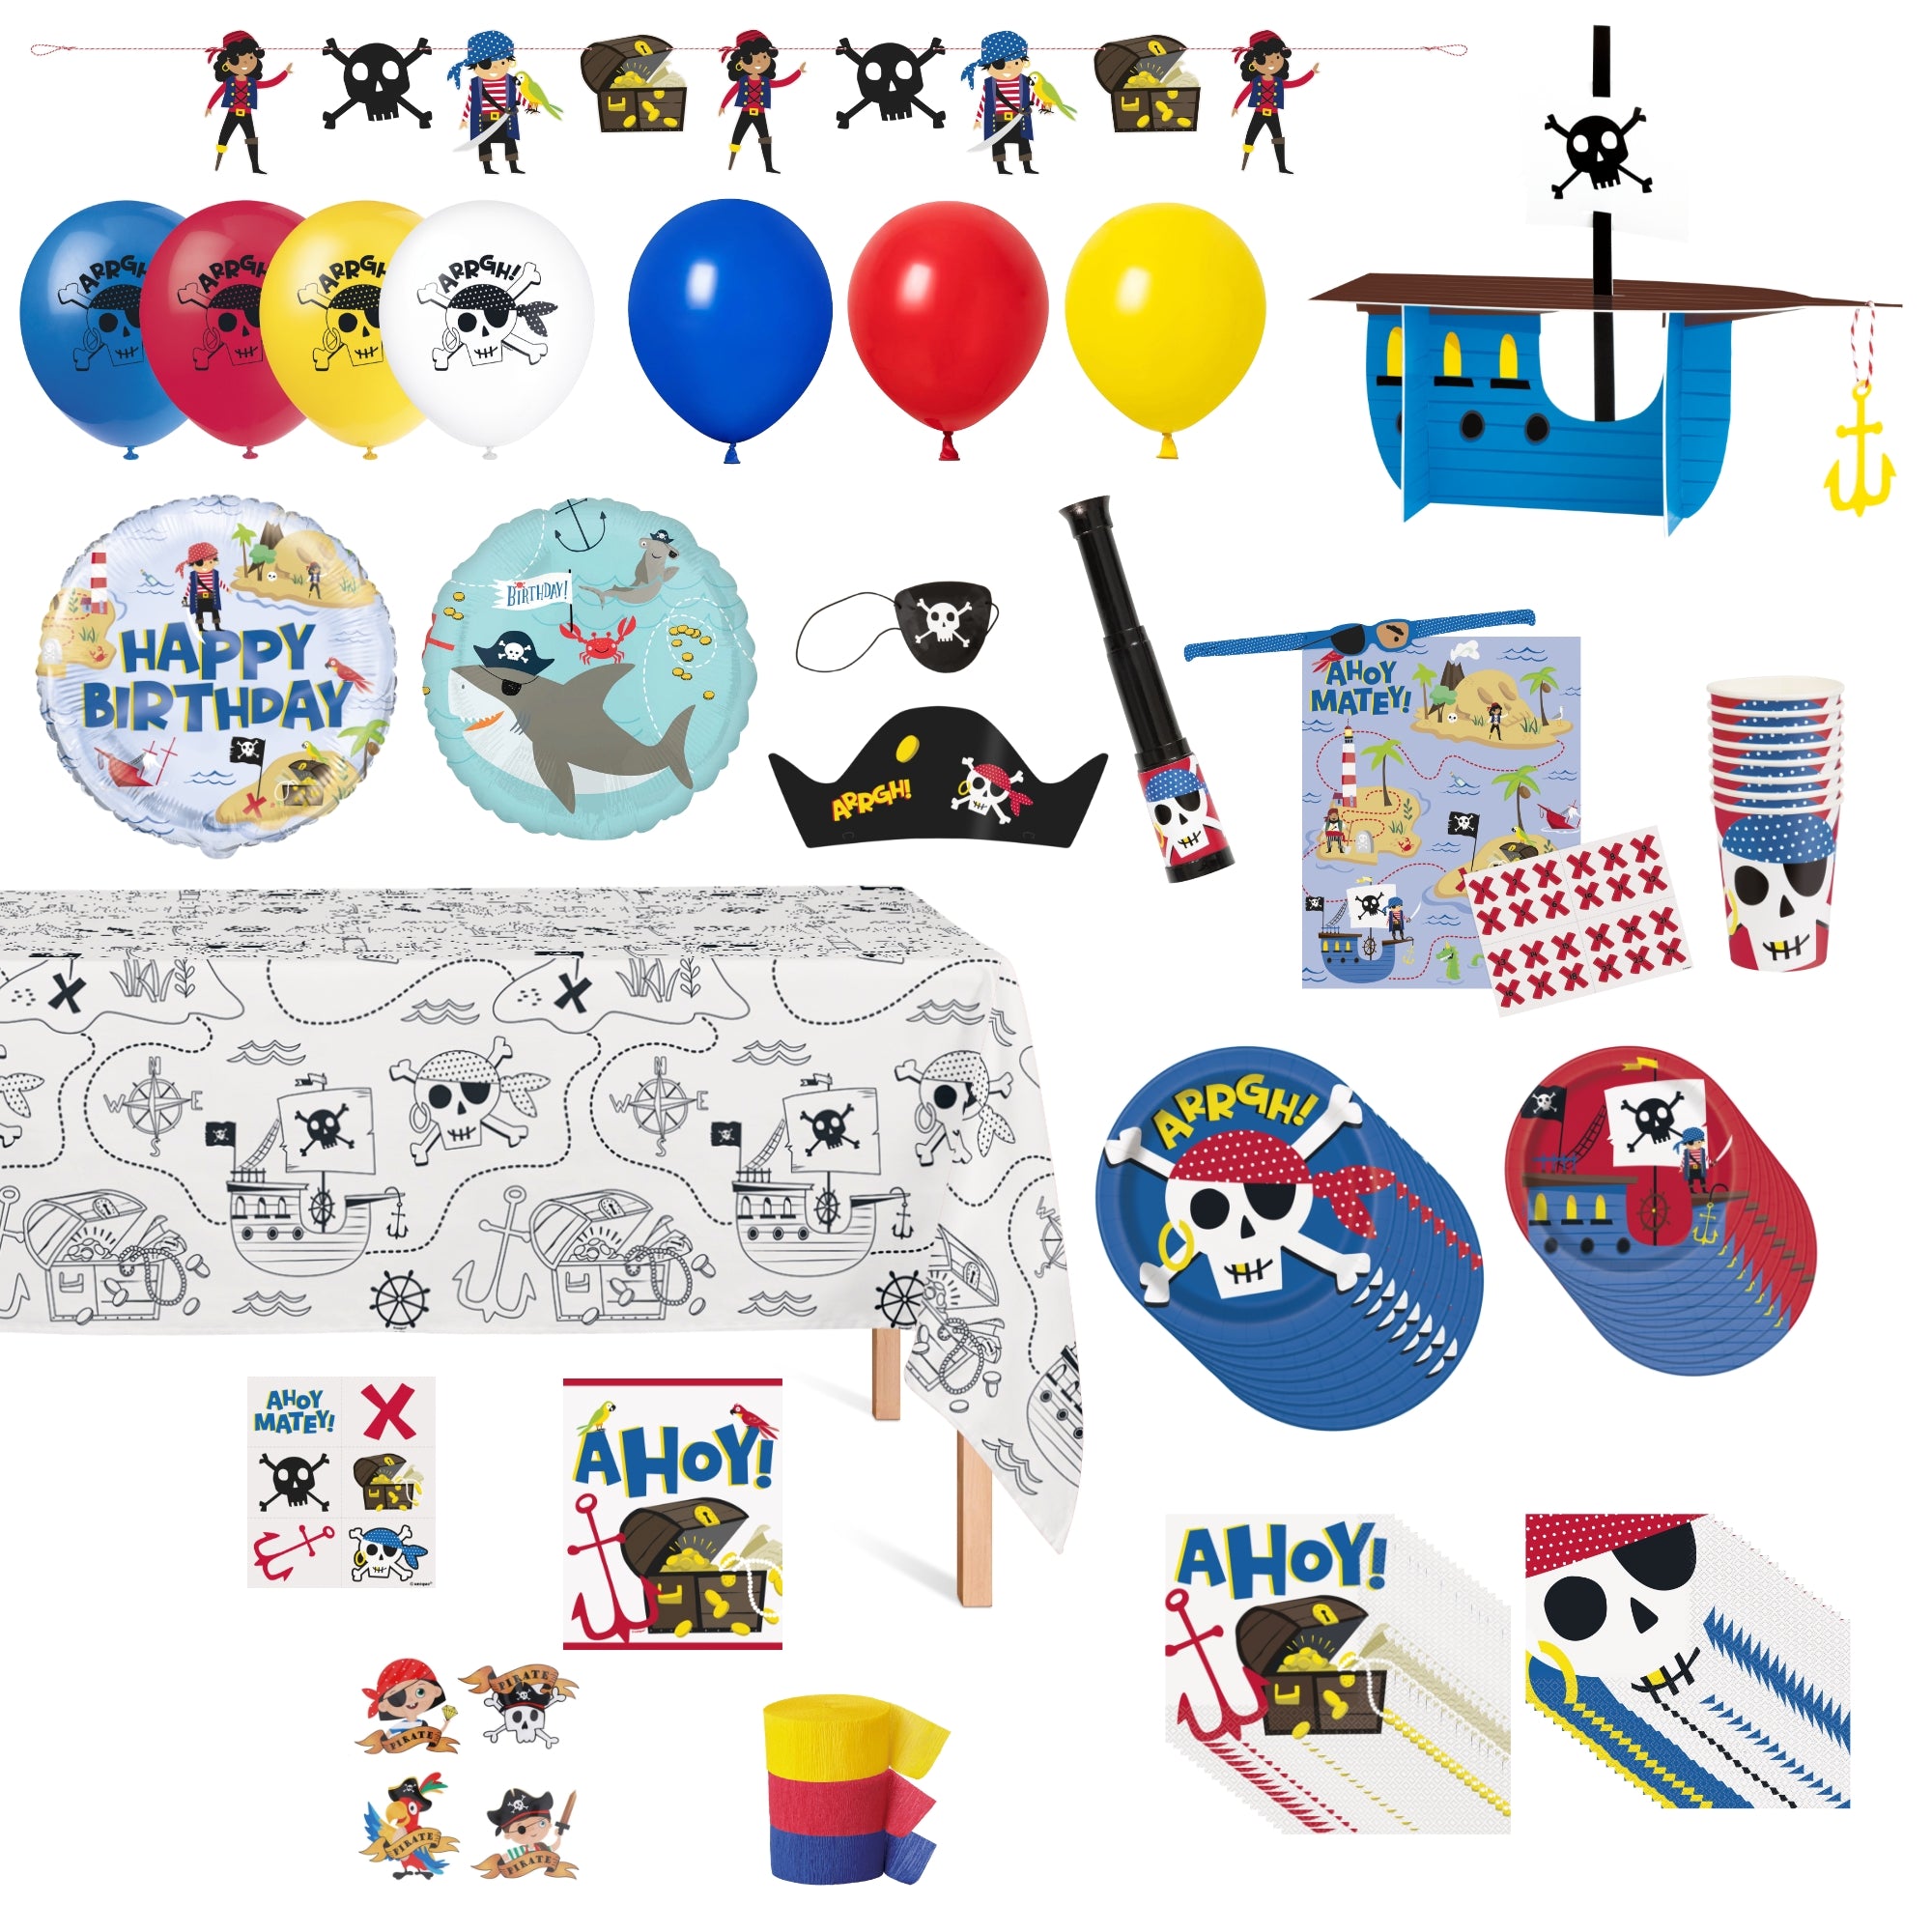 Ahoy Pirate Ultimate Birthday Party Supplies Kit